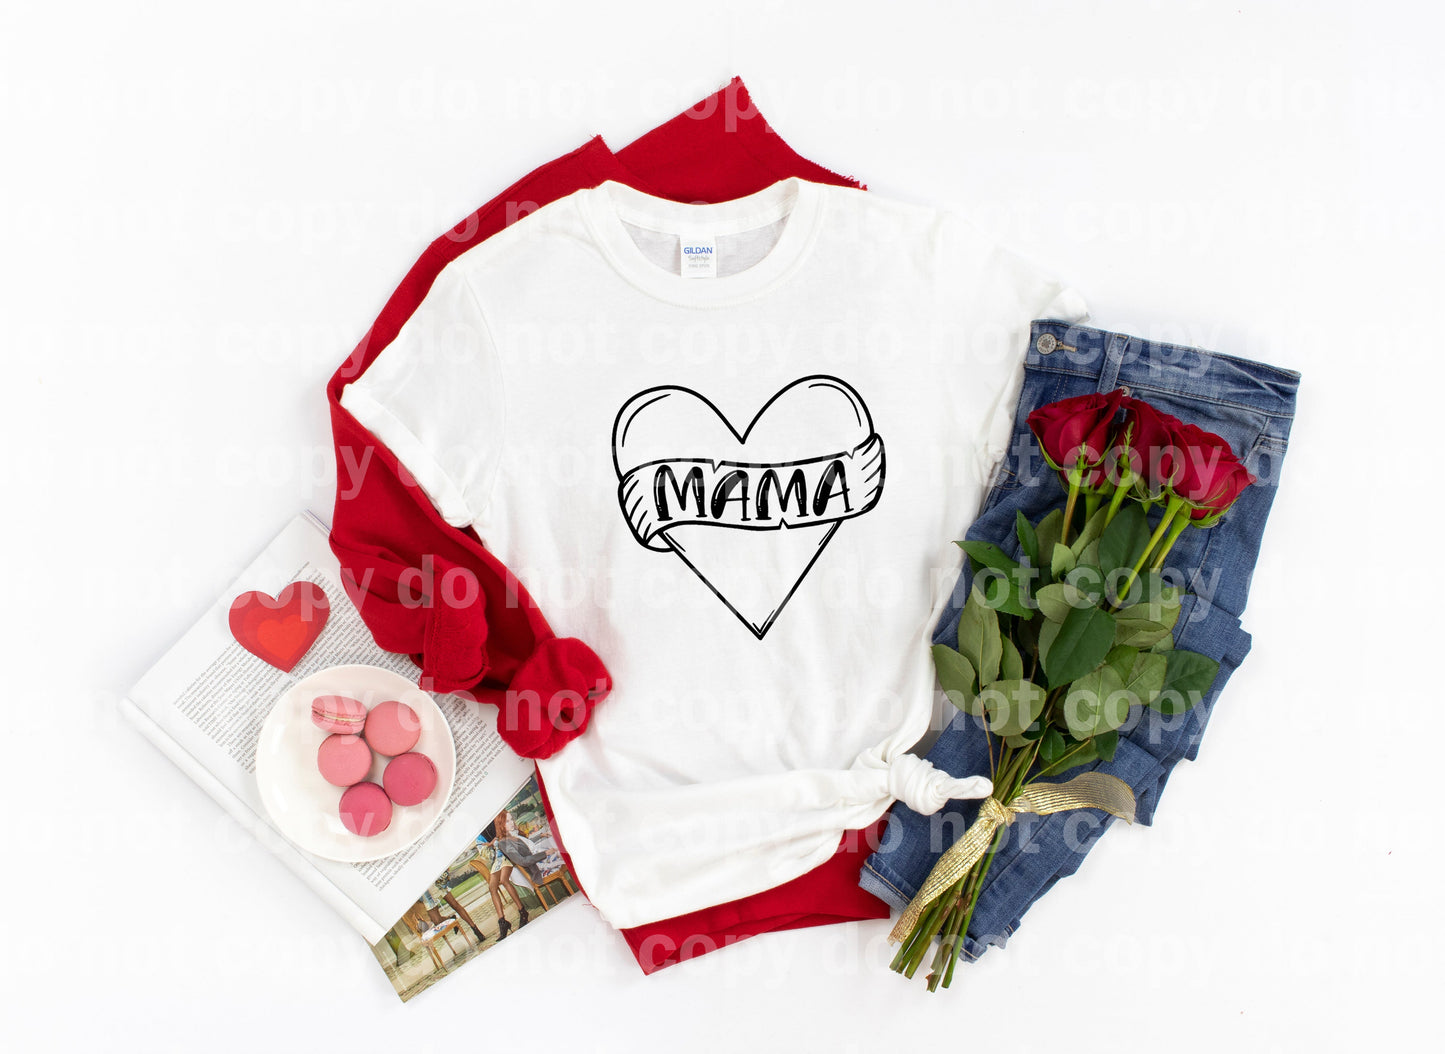 Mama Heart Full Color/One Color Dream Print or Sublimation Print